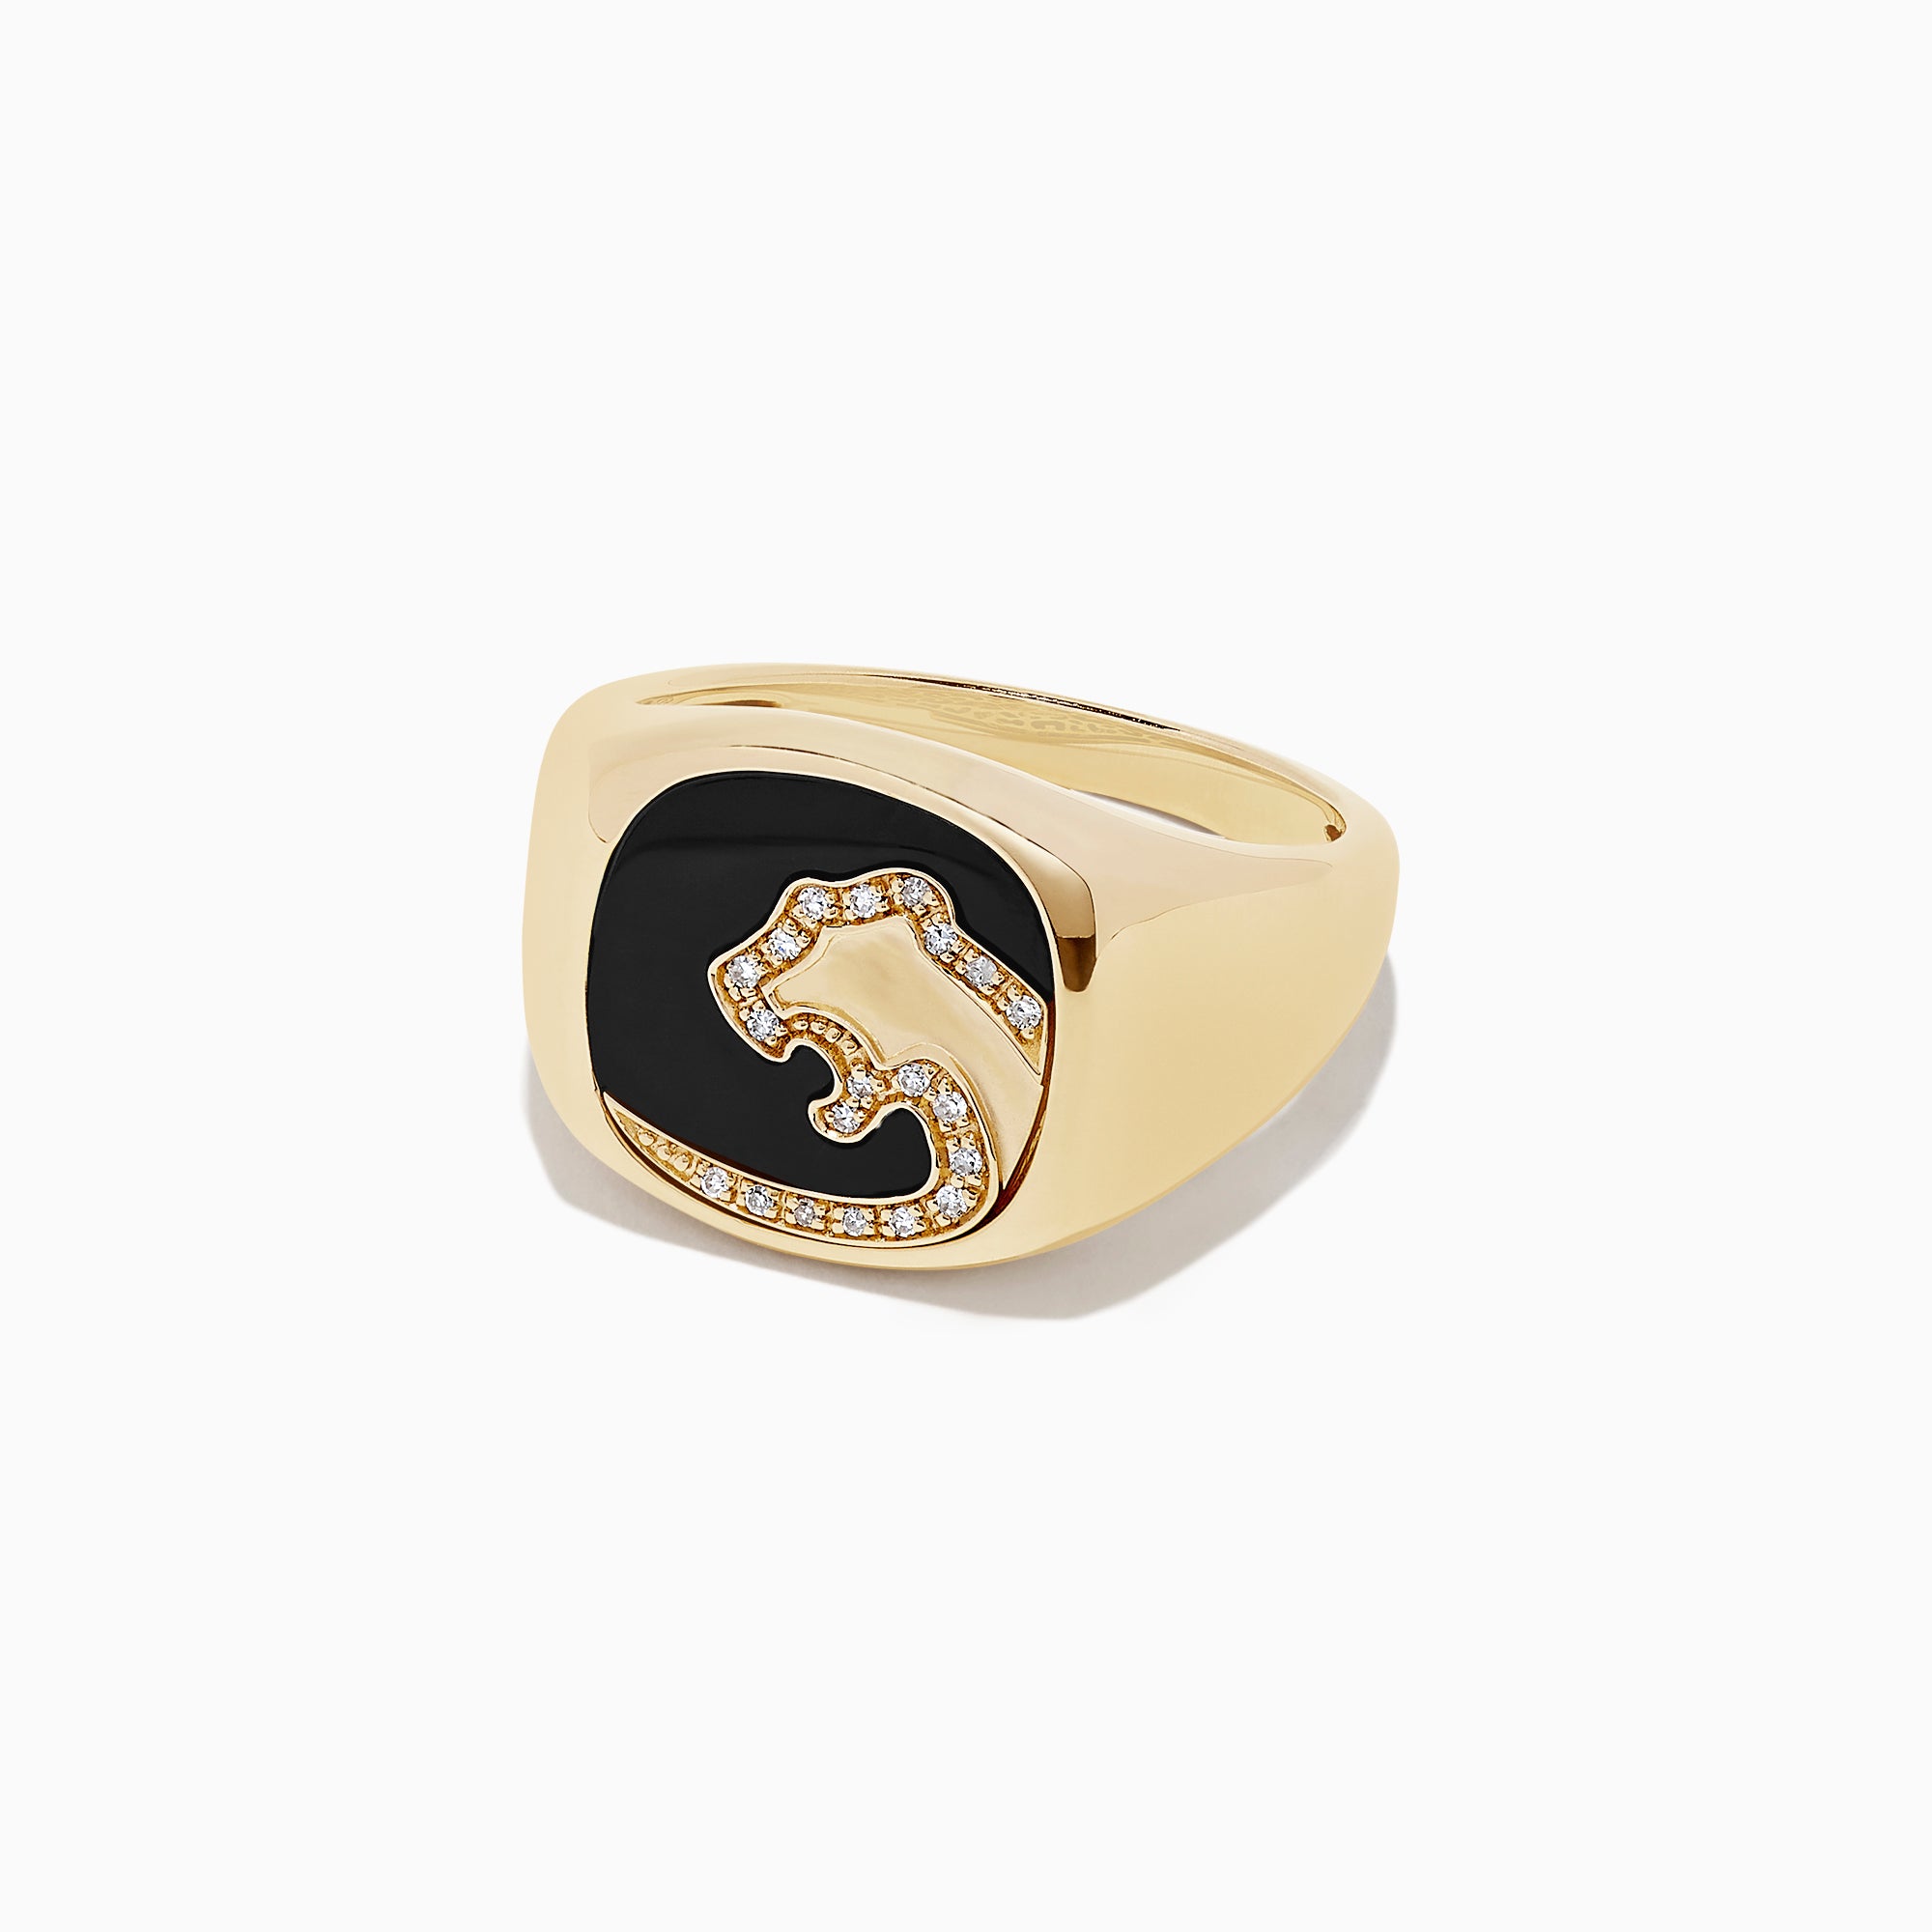 Effy Men's 14K Gold Onyx and Diamond Panther Silhouette Ring, 1.02 TCW